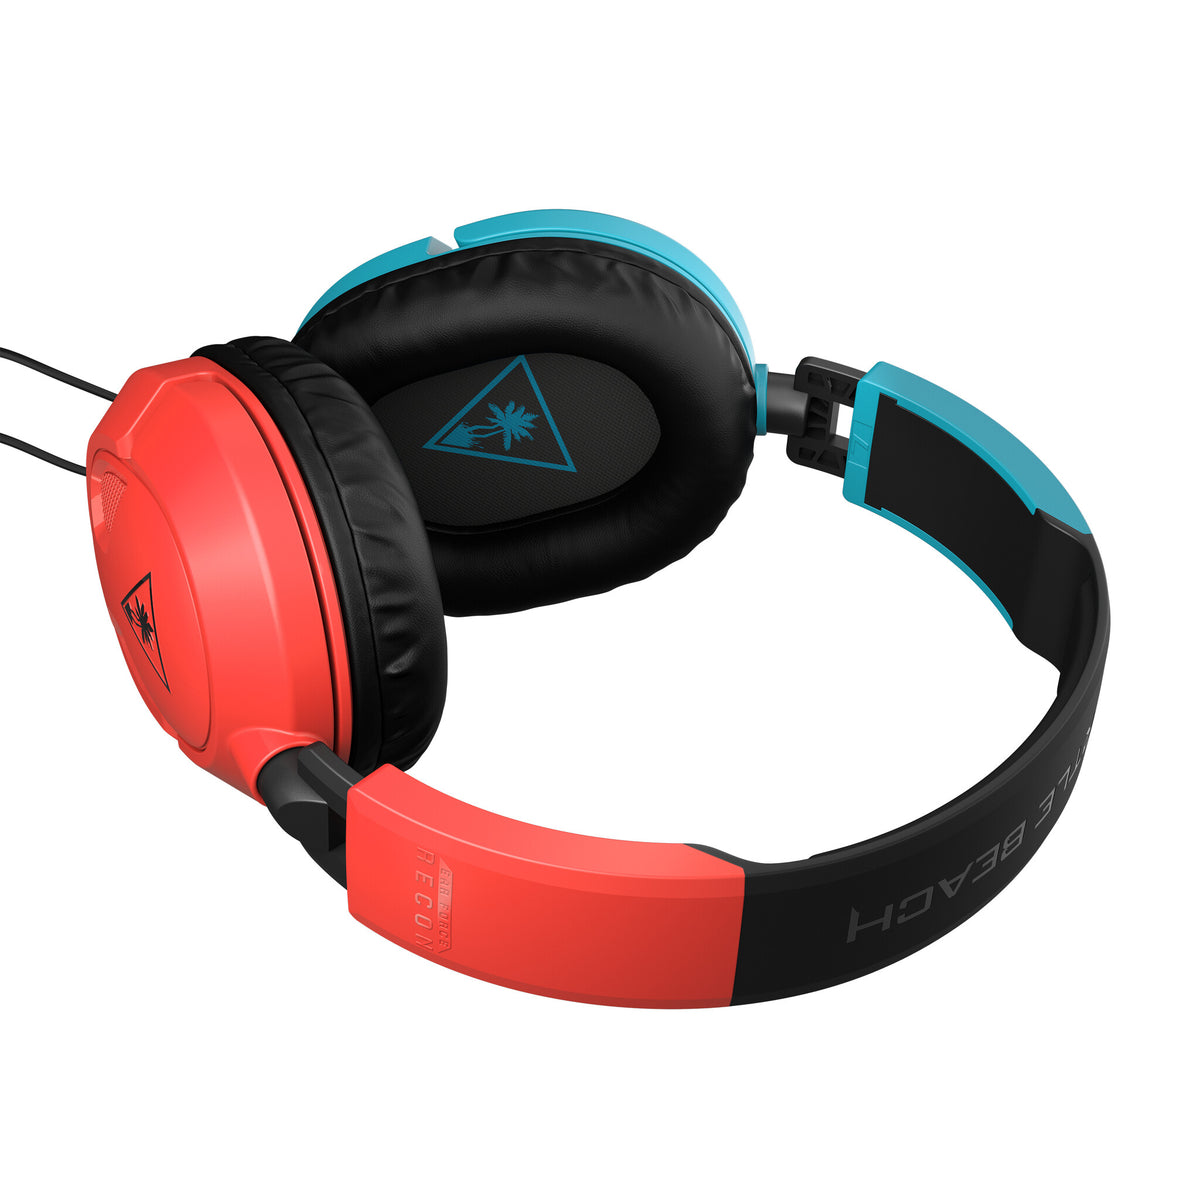 Turtle Beach Recon 50 - 3.5mm Wired Gaming Headset in Blue / Red